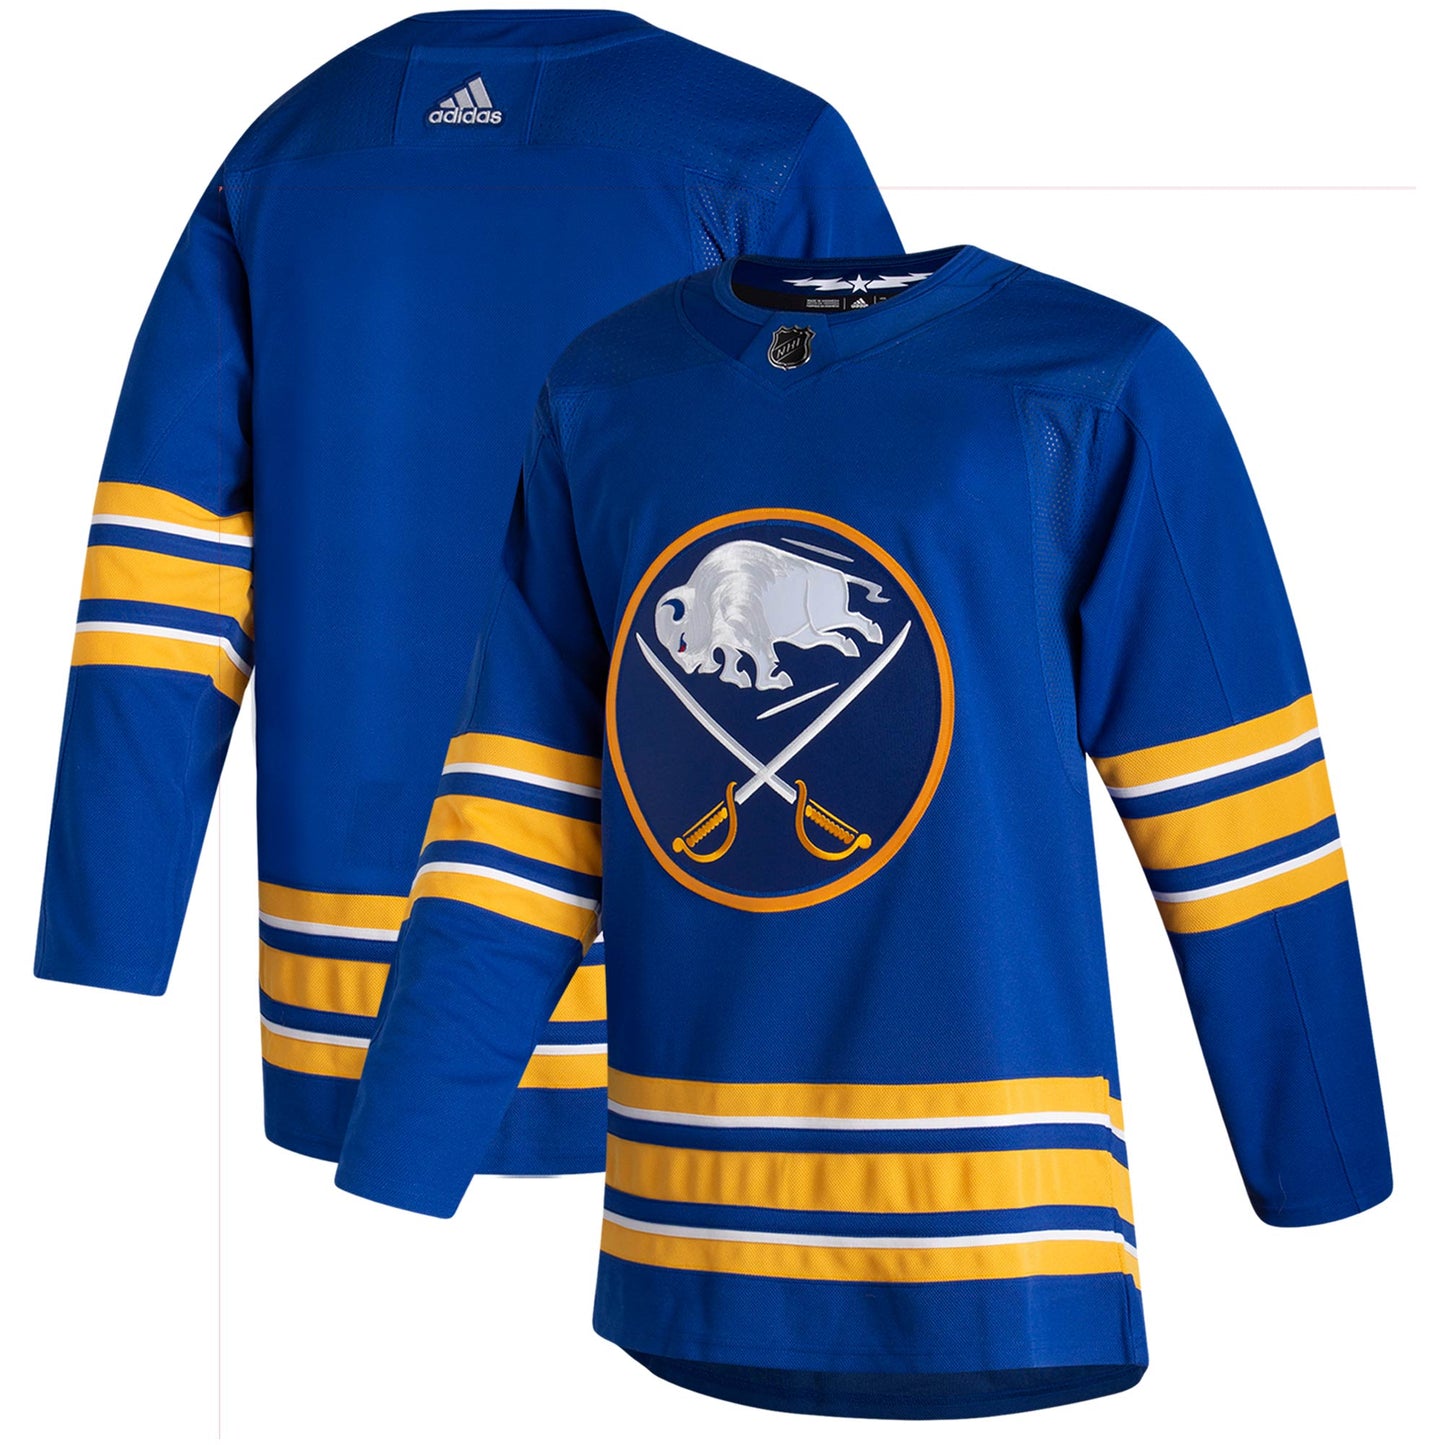 Buffalo Sabres adidas 2020/21 Home Authentic Jersey - Royal